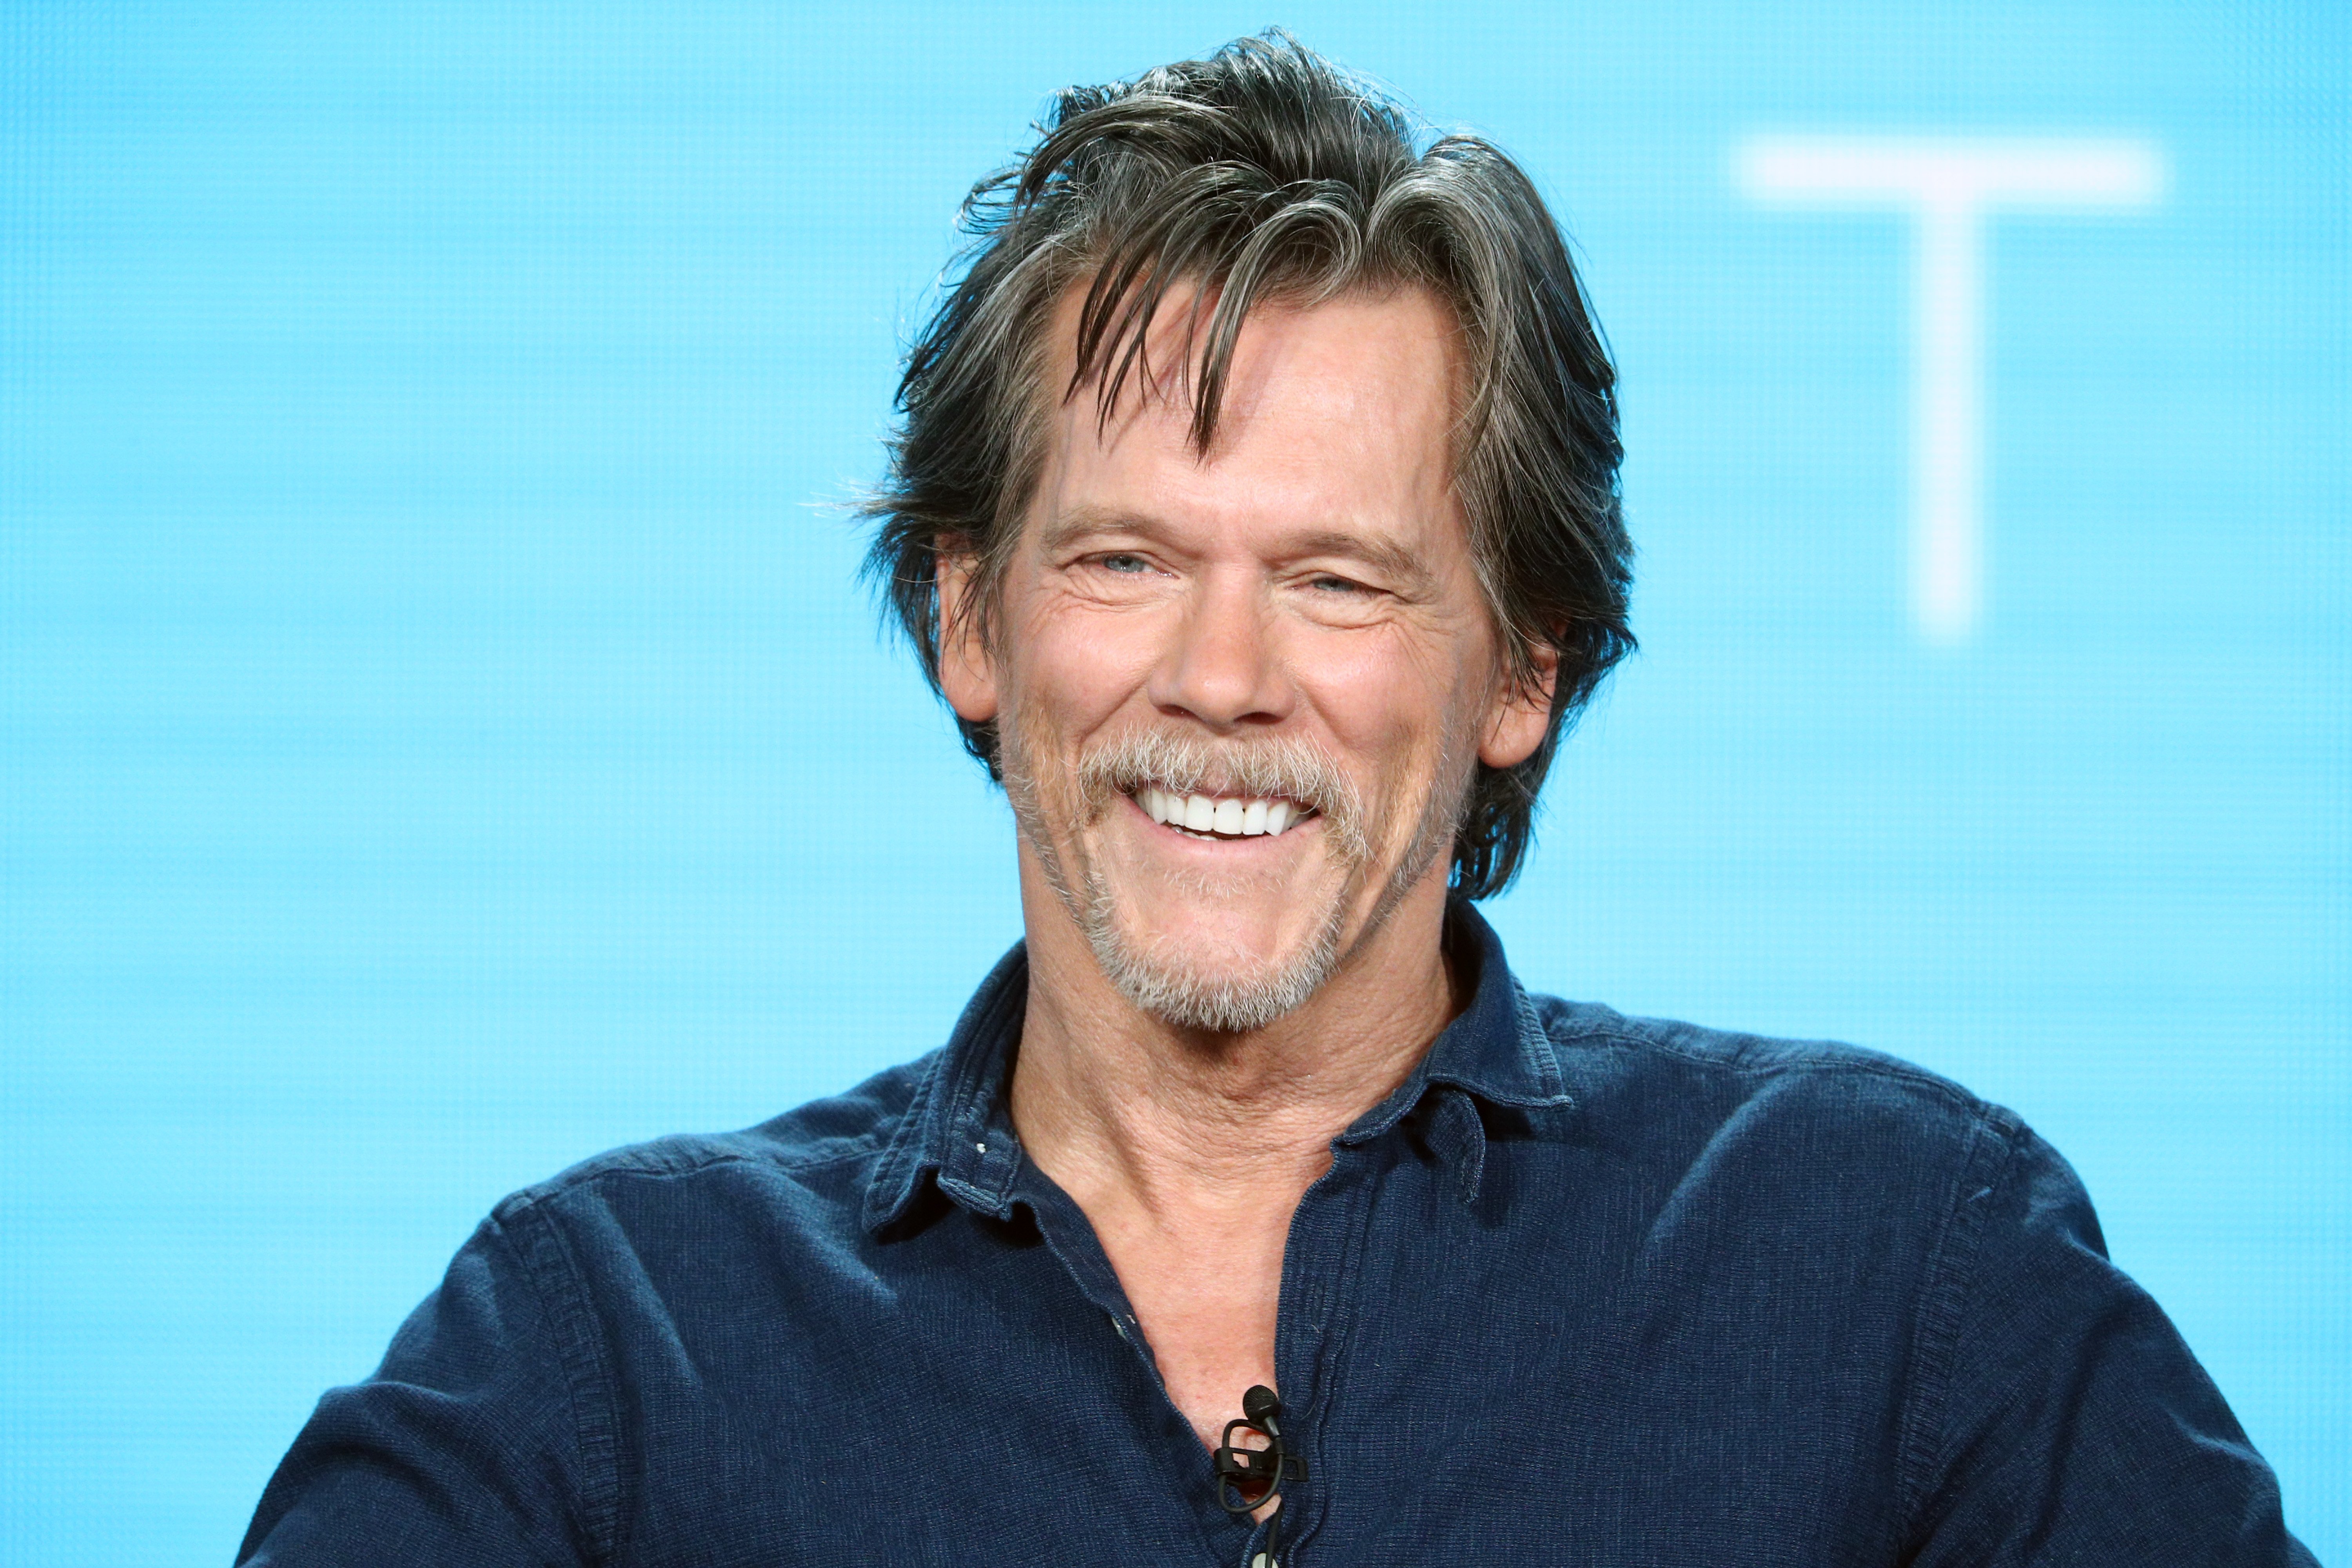 Kevin Bacon speaks during the Showtime segment of the 2019 Winter Television Critics Association Press Tour at The Langham Huntington, Pasadena on January 31, 2019 | Photo: GettyImages